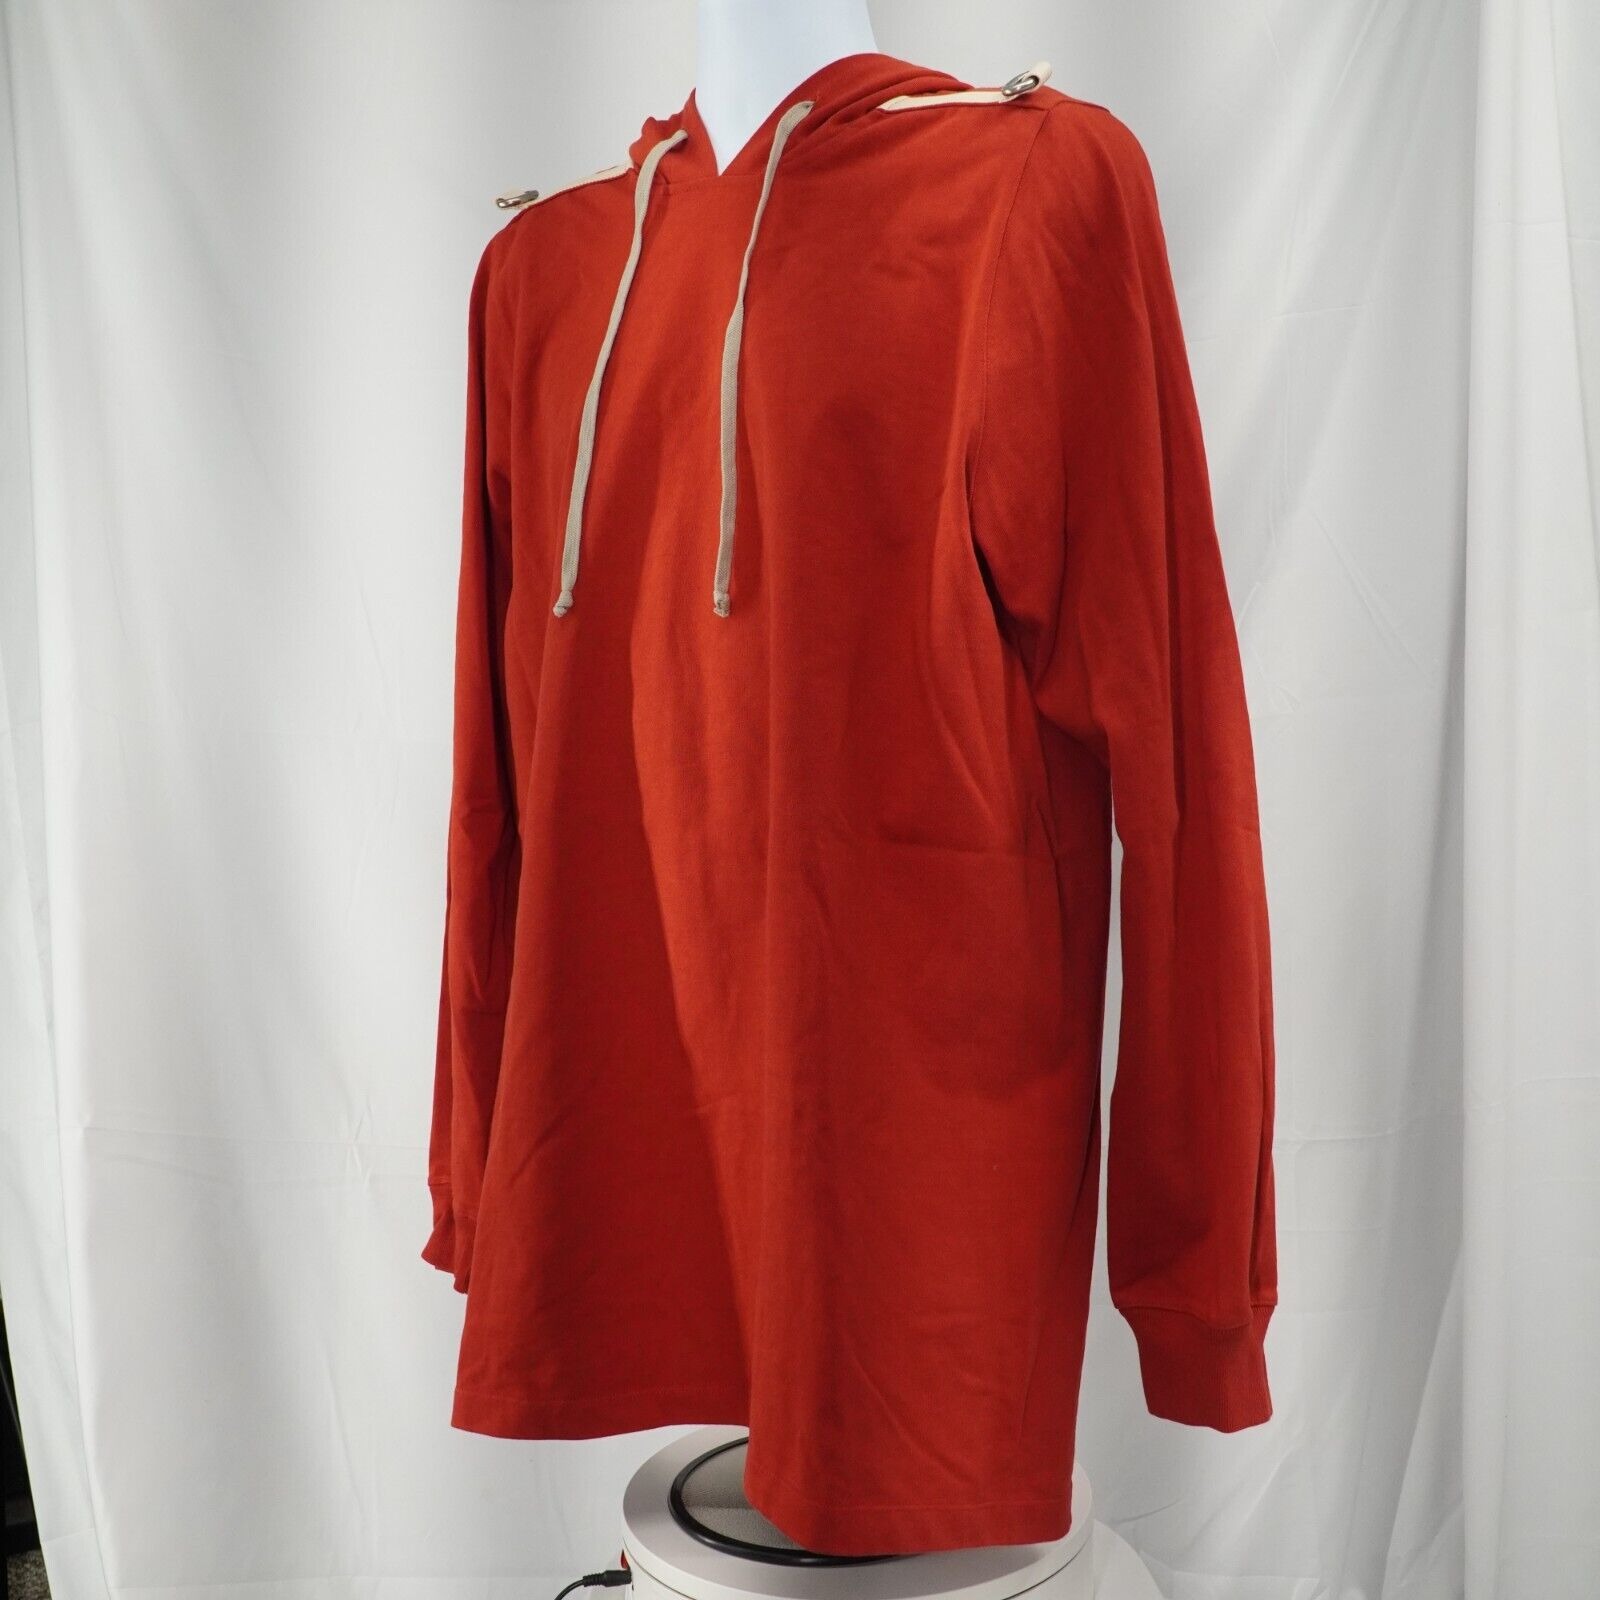 Knit Hoodie Sweater Longline Cardinal Red Natural D Rings - 5